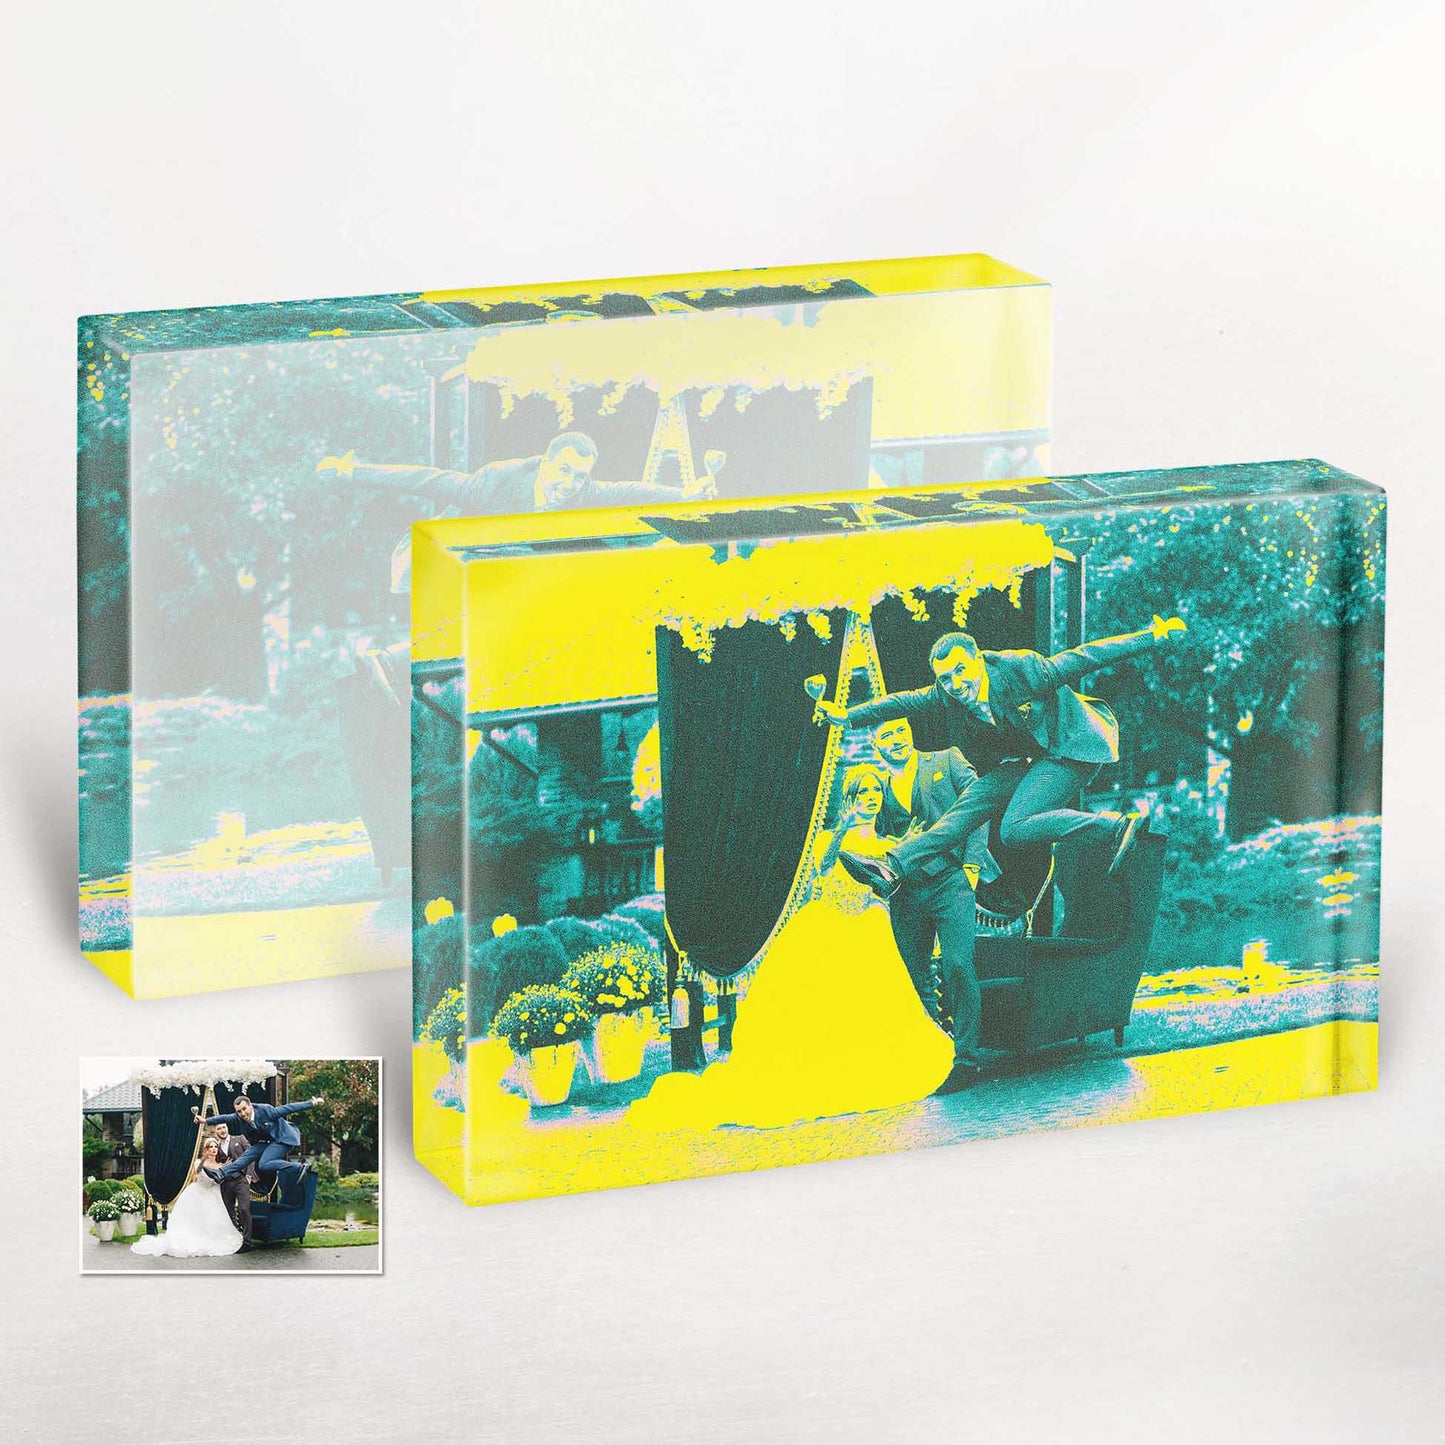 Experience the power of personalized art with this Acid Yellow Color Effect Acrylic Block Photo. The striking yellow shade exudes energy and excitement, creating a captivating focal point that brings a modern and edgy vibe to your space